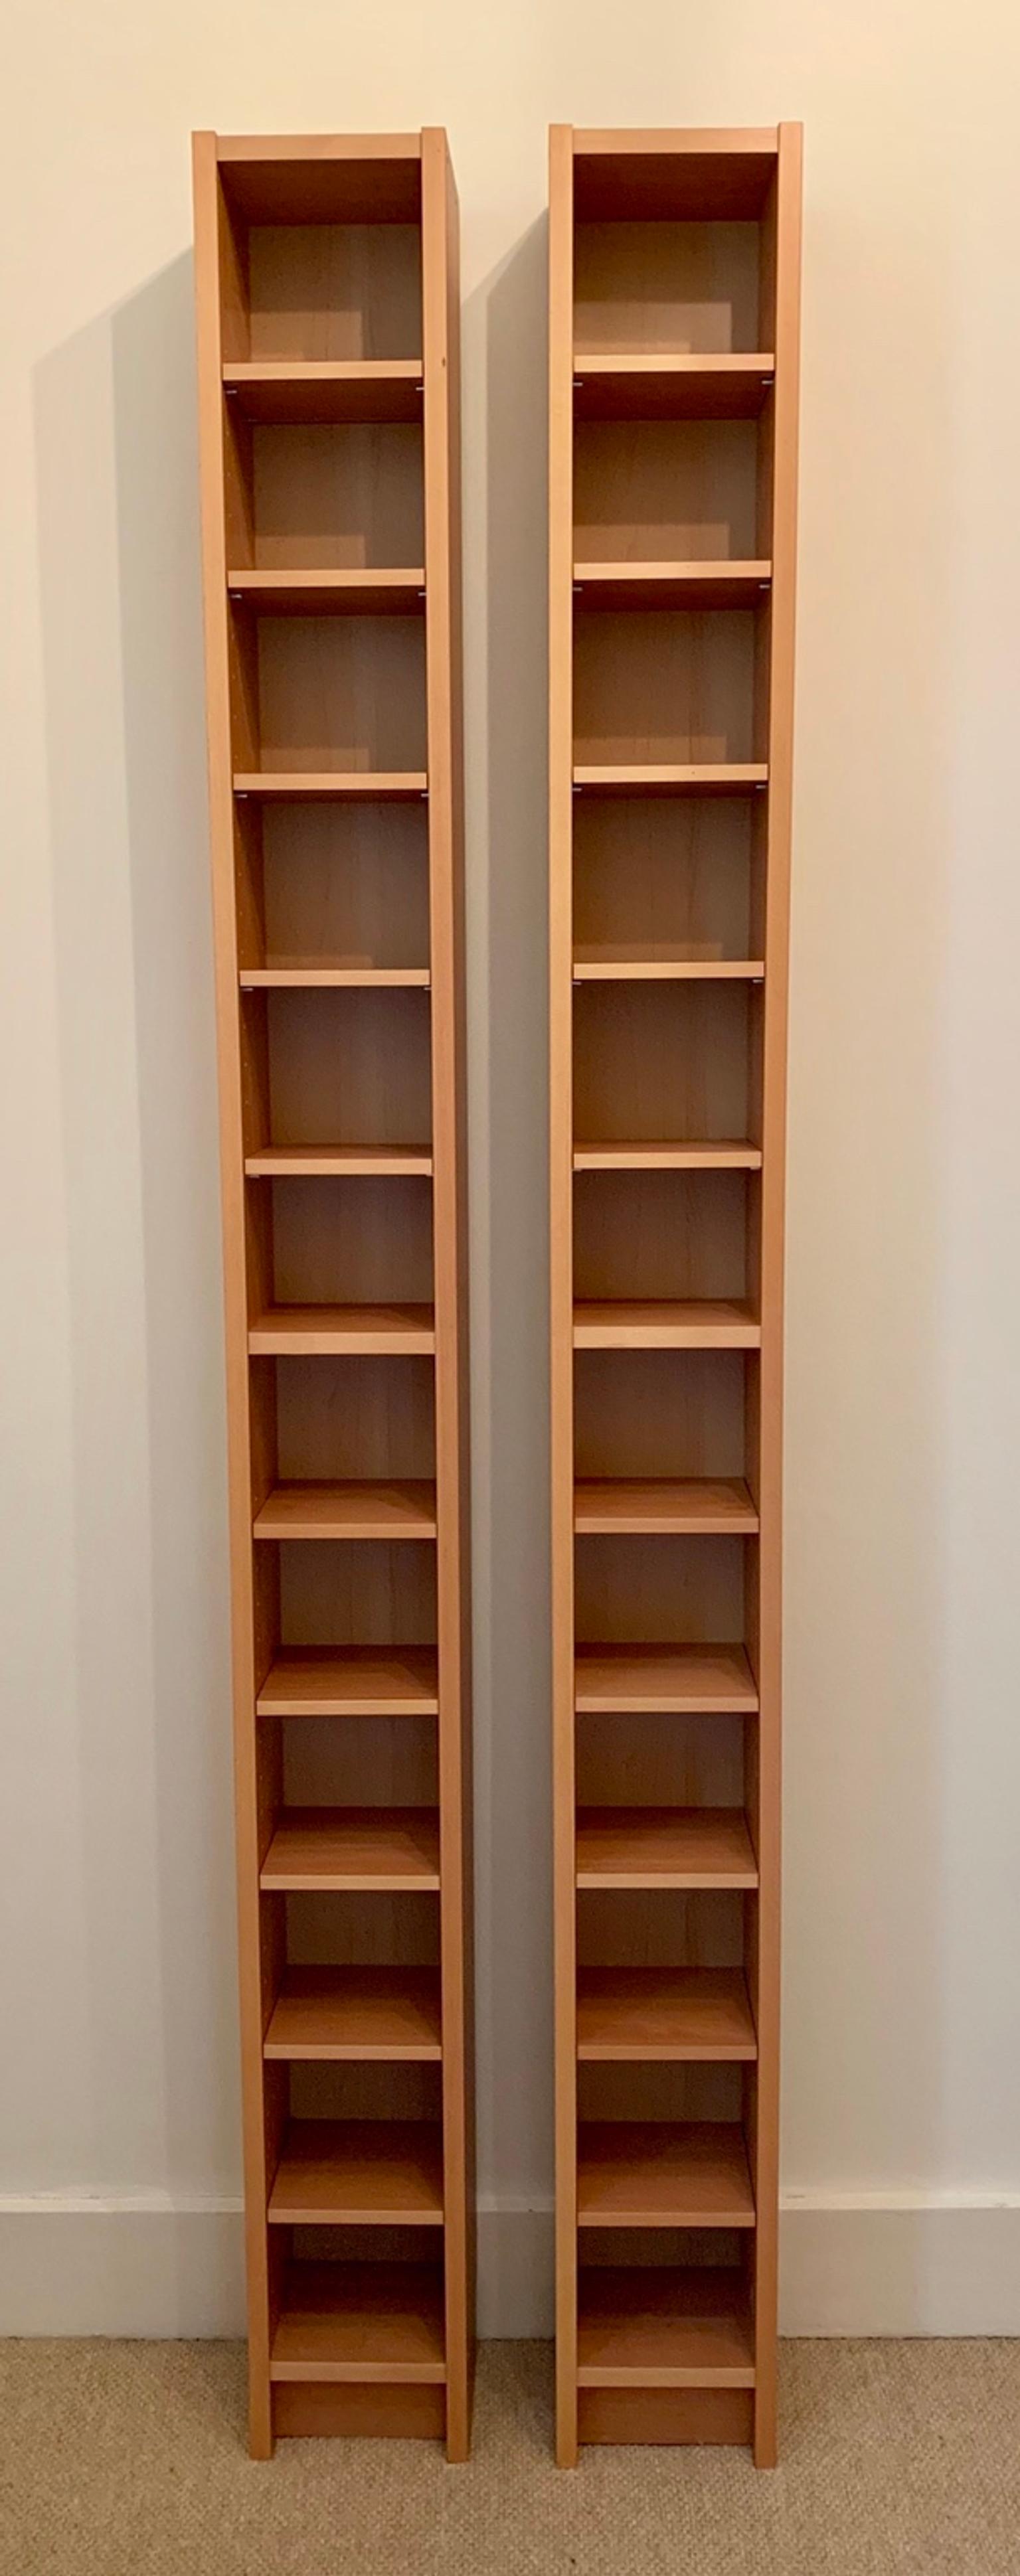 Two Ikea Gnedby Cd Dvd Book Shelved Beech In Nw6 Camden For 10 00 For Sale Shpock